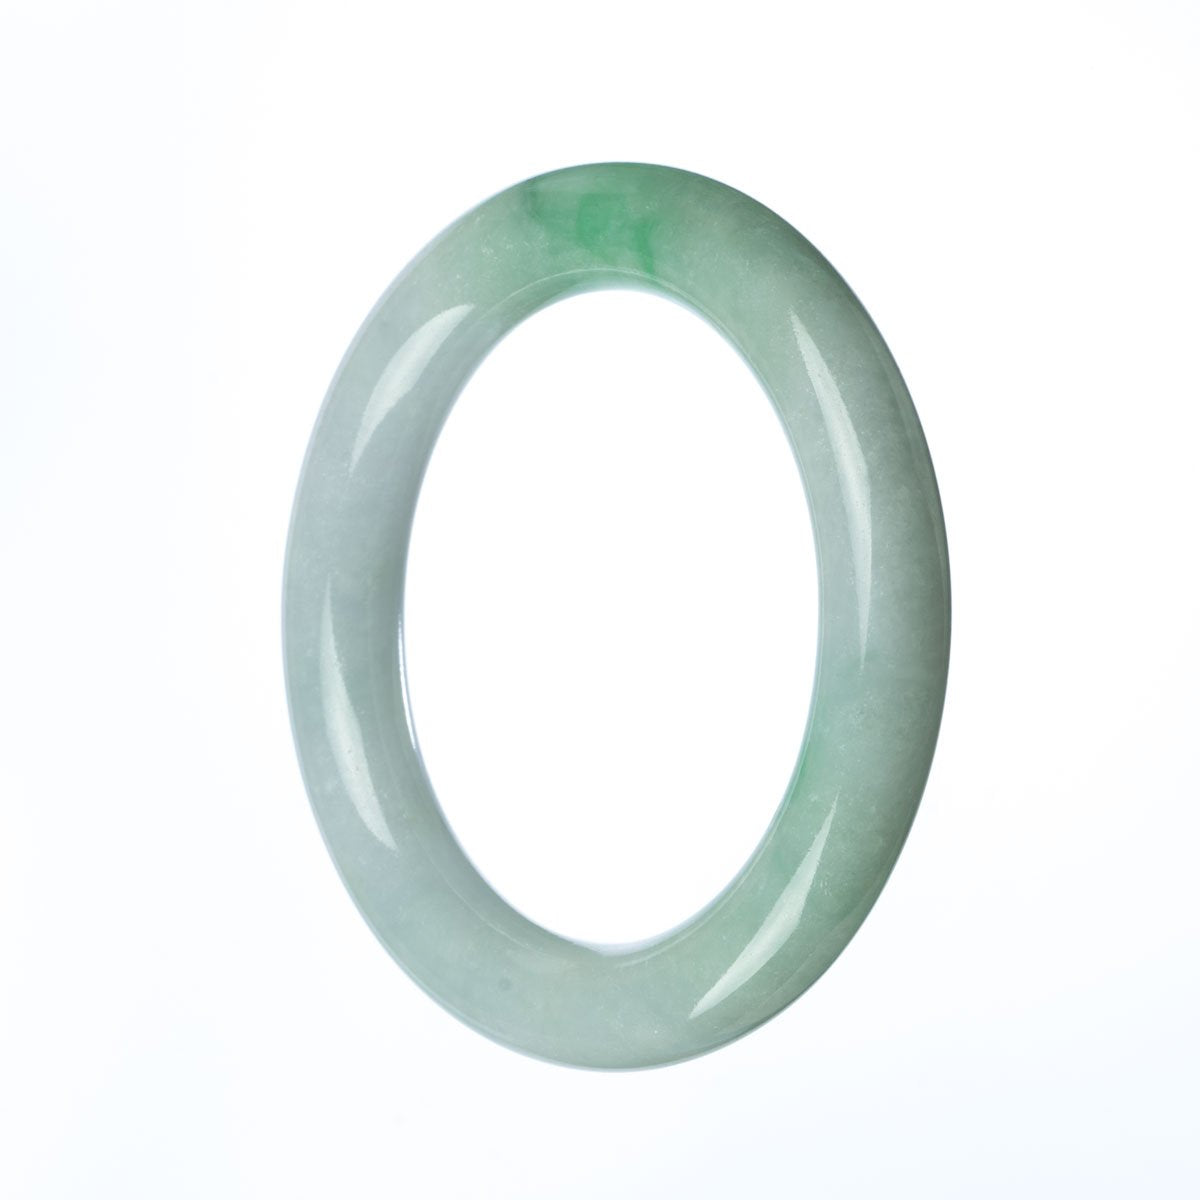 A close-up image of a round, certified natural green white jadeite bracelet. The bracelet is 58mm in diameter and is sold by MAYS GEMS.